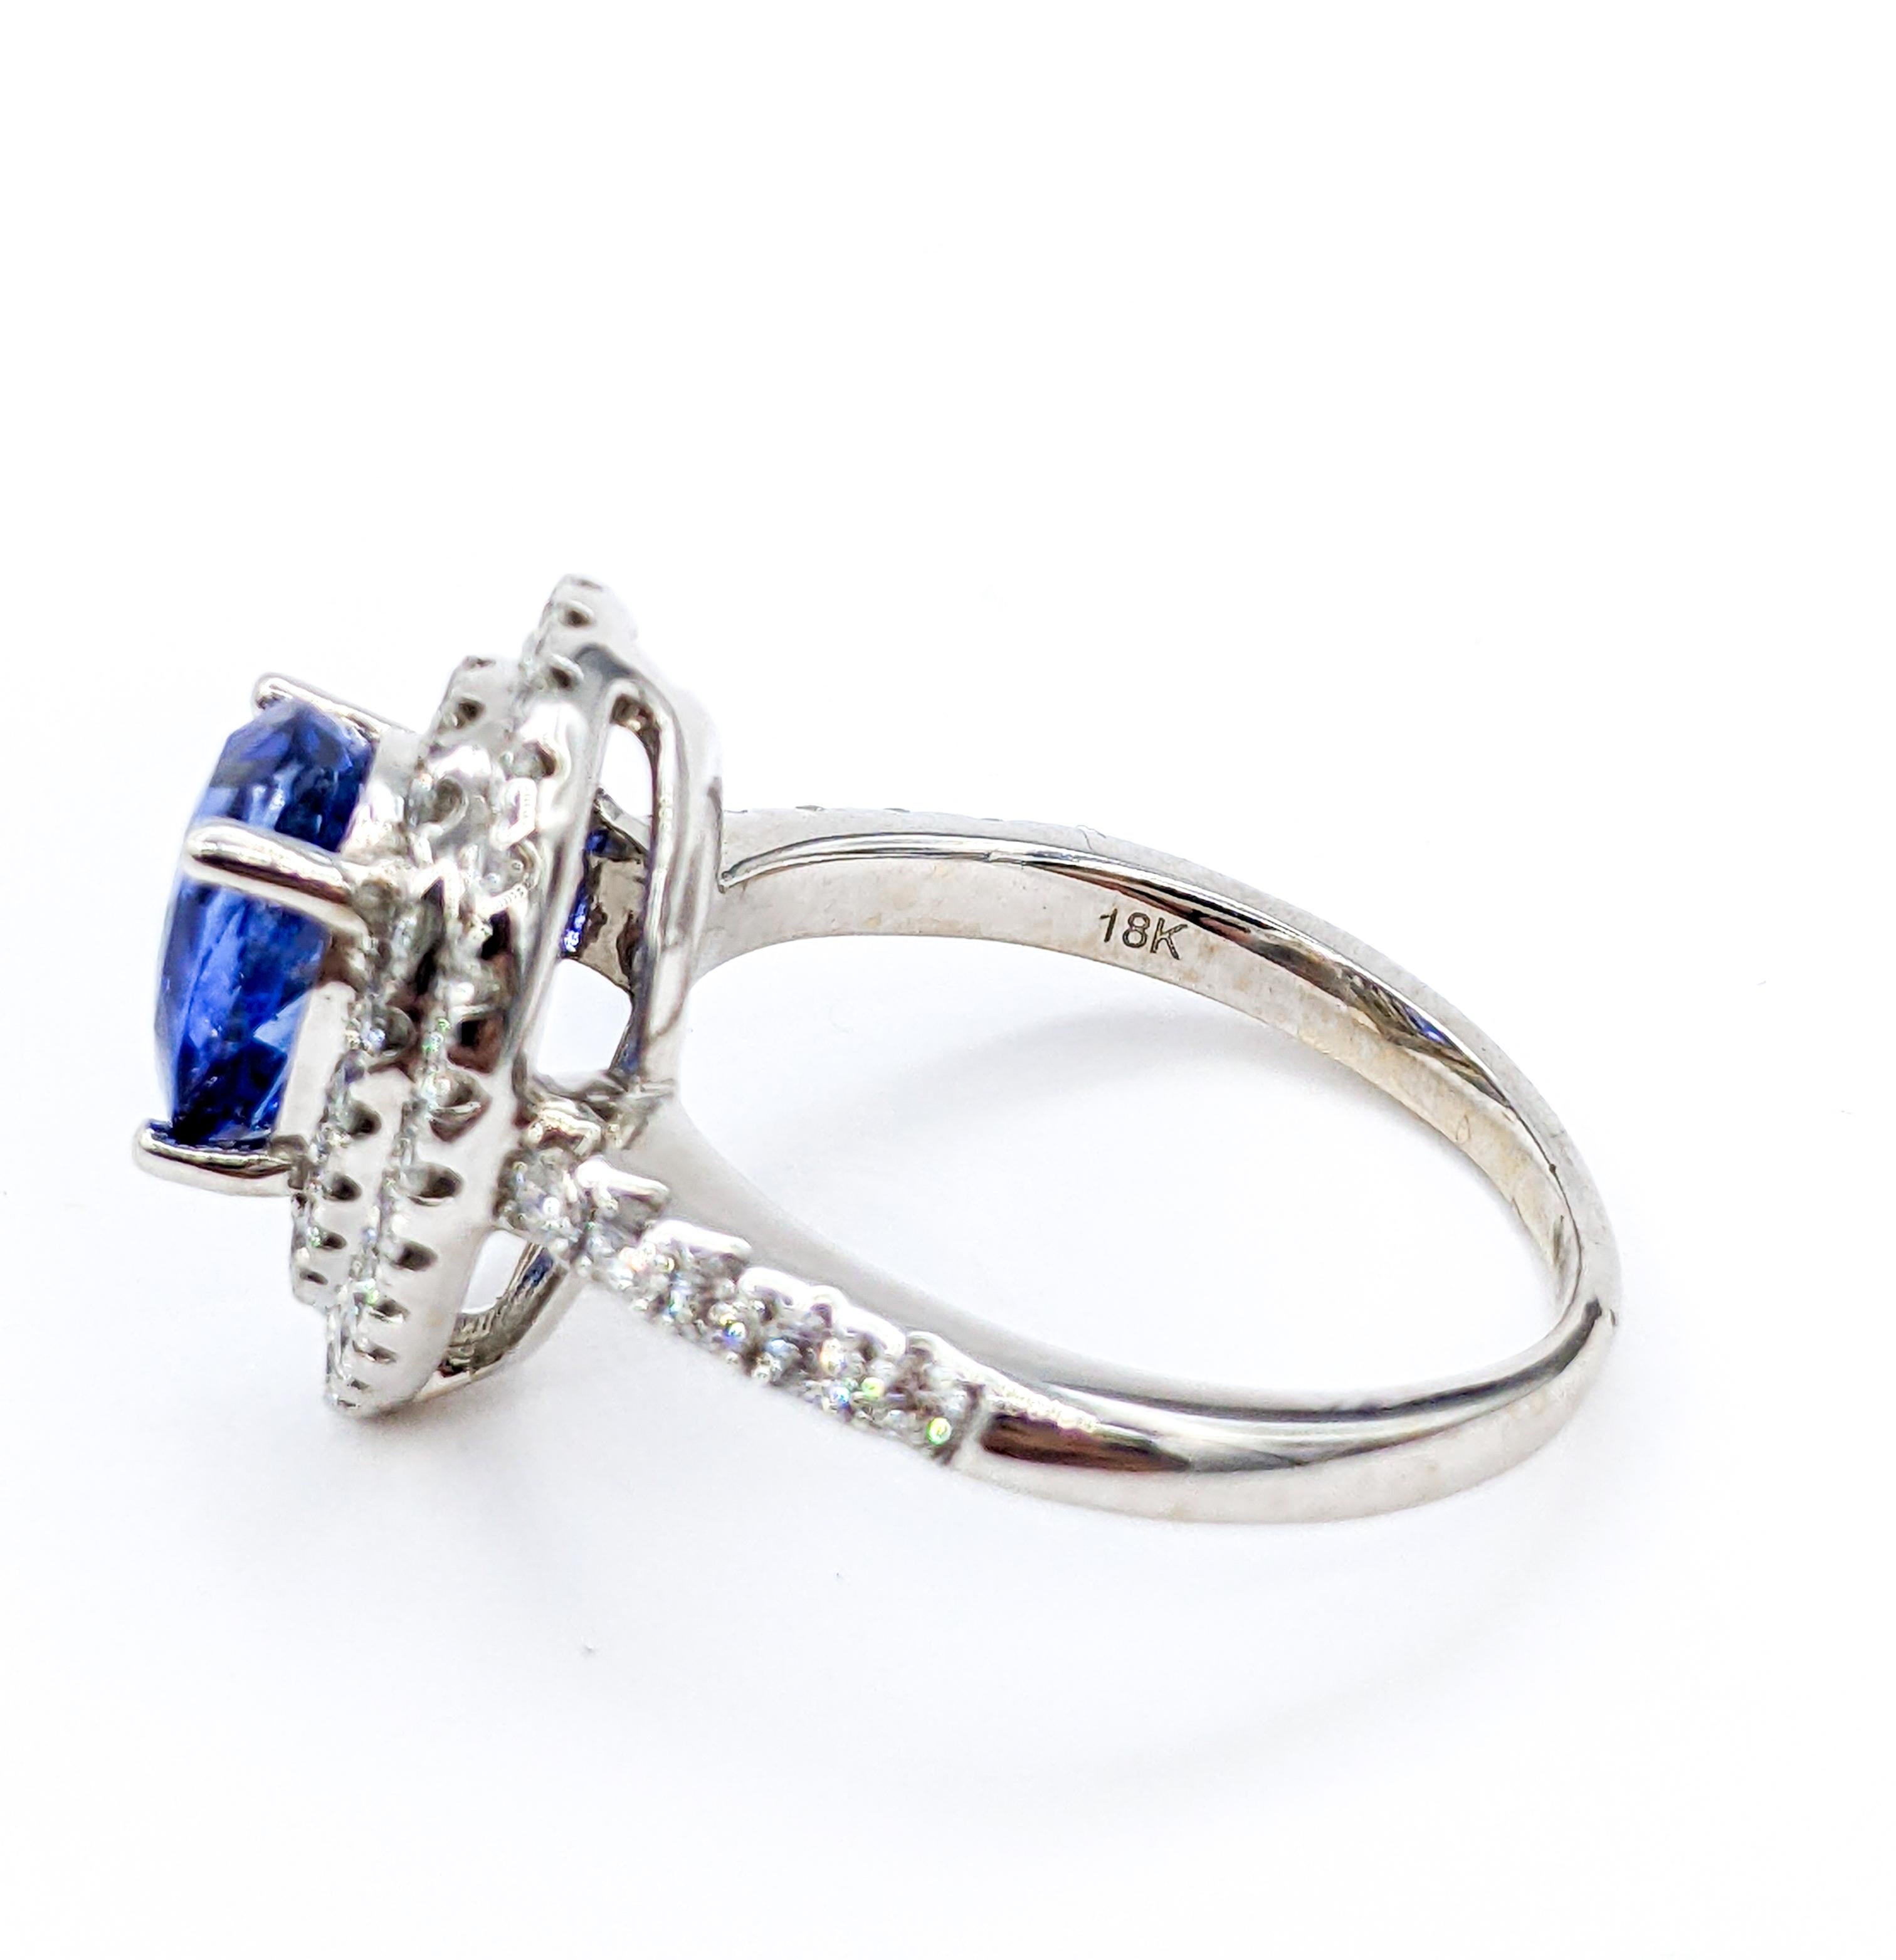 Stunning 2.00ct Sapphire & Diamond Cocktail Ring - 18K White Gold For Sale 1